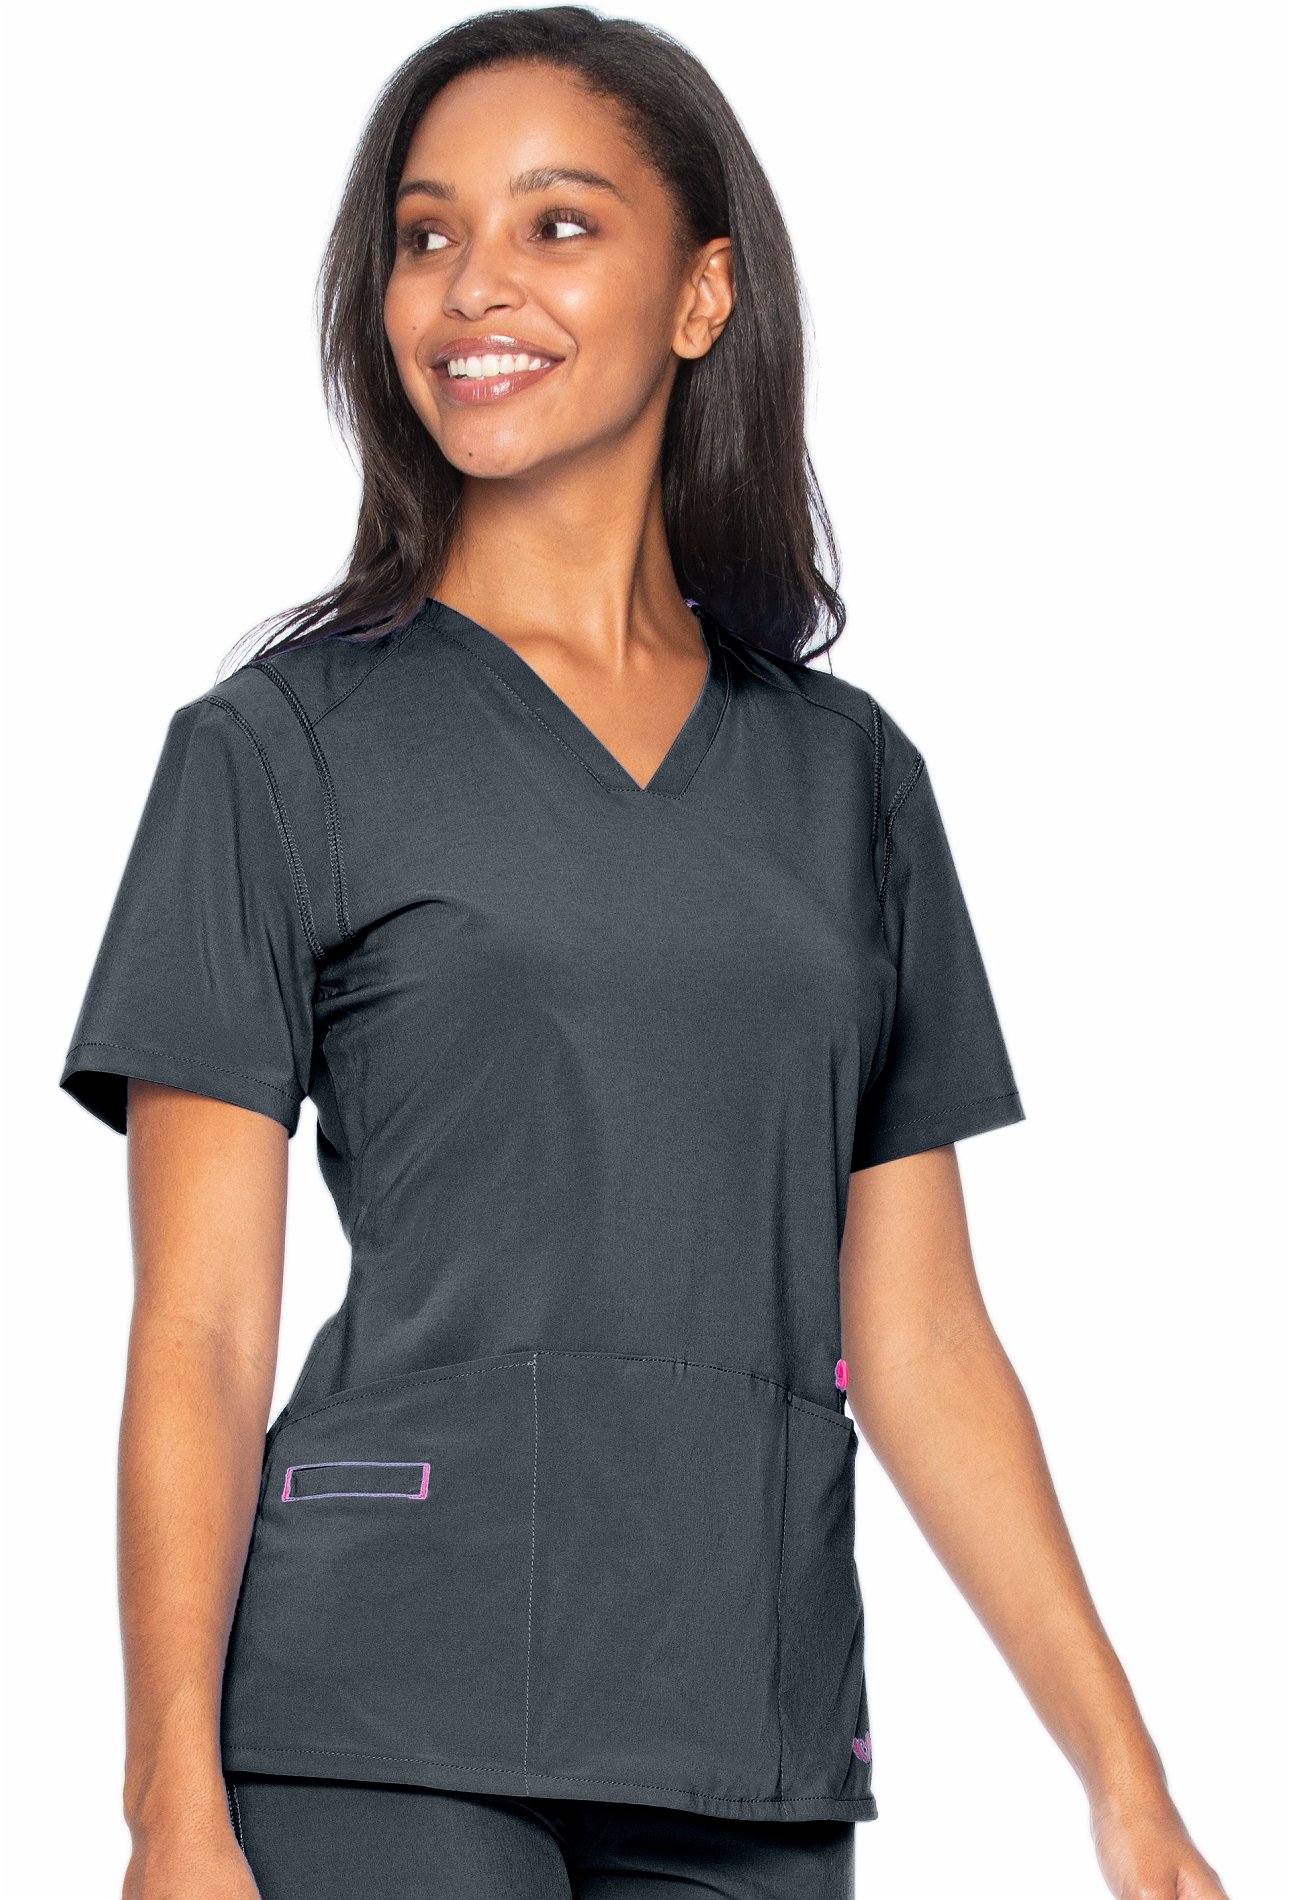 Smitten Women's Solid Athletic Fit V-Neck Scrub Top-S101002 | Medical ...